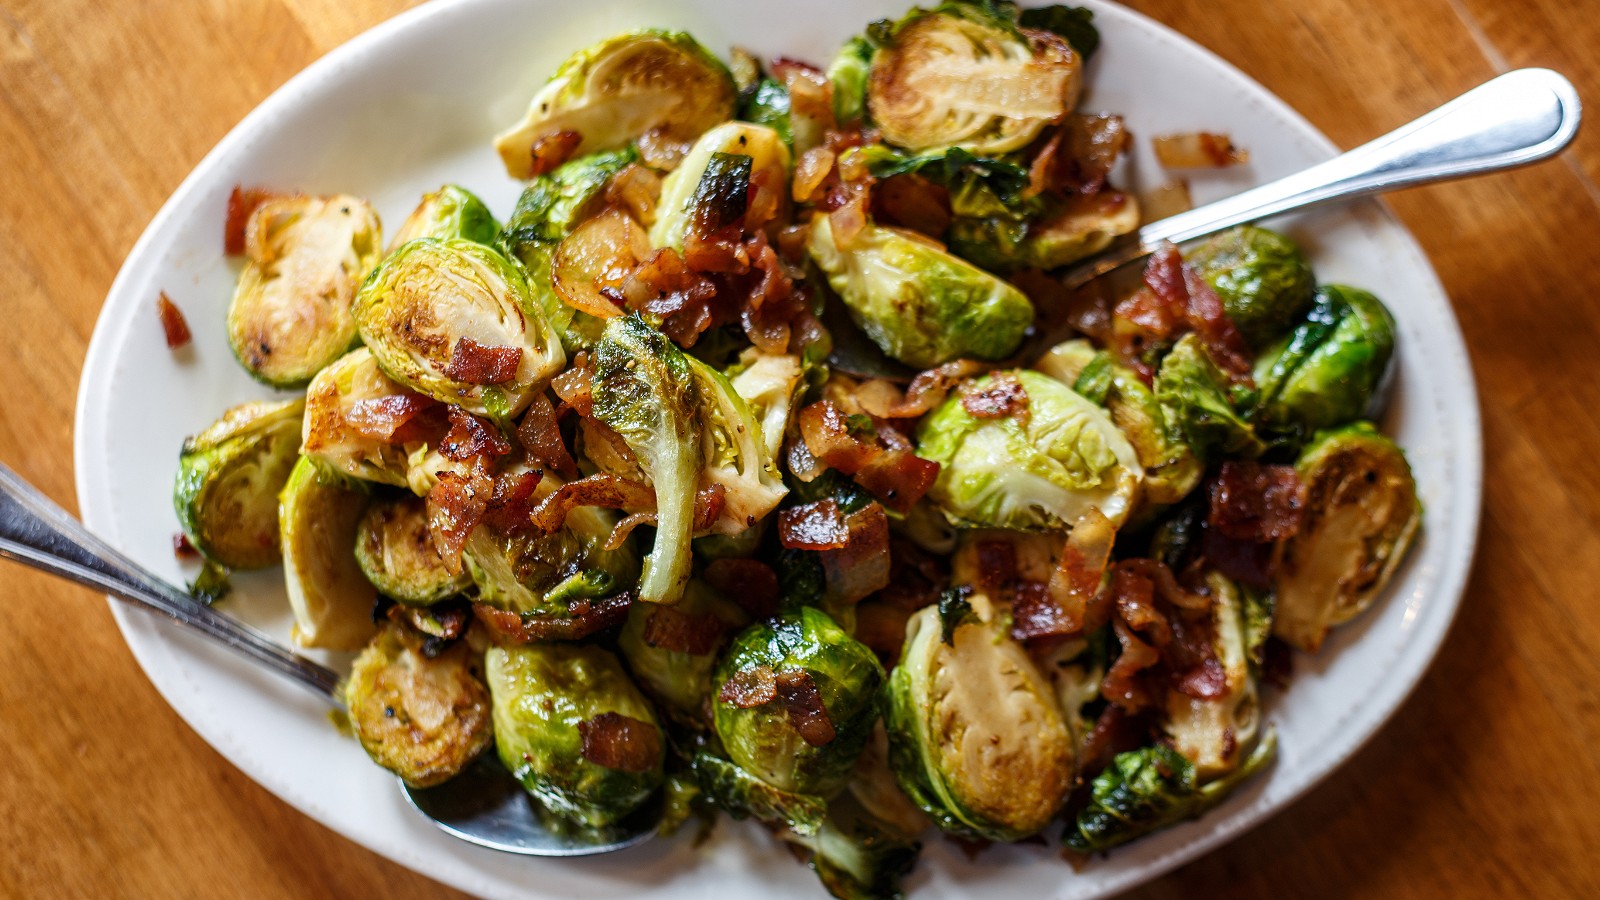 Image of Maple Bacon Brussel Sprouts